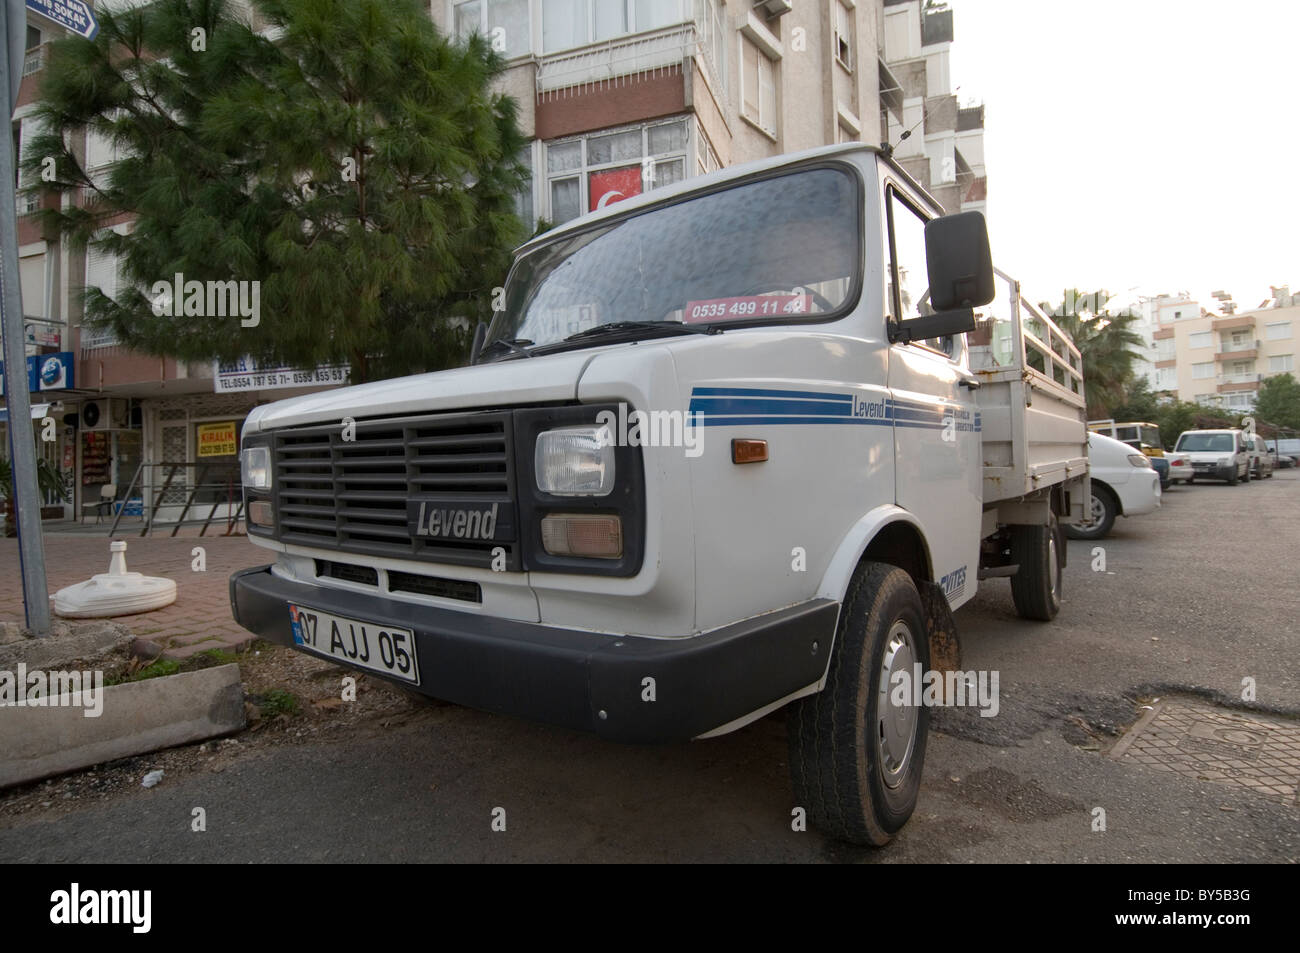 levend sherpa van made under license from BMC BL British leyland LDV vans  in turkey turkish car industry commercial vechical Stock Photo - Alamy